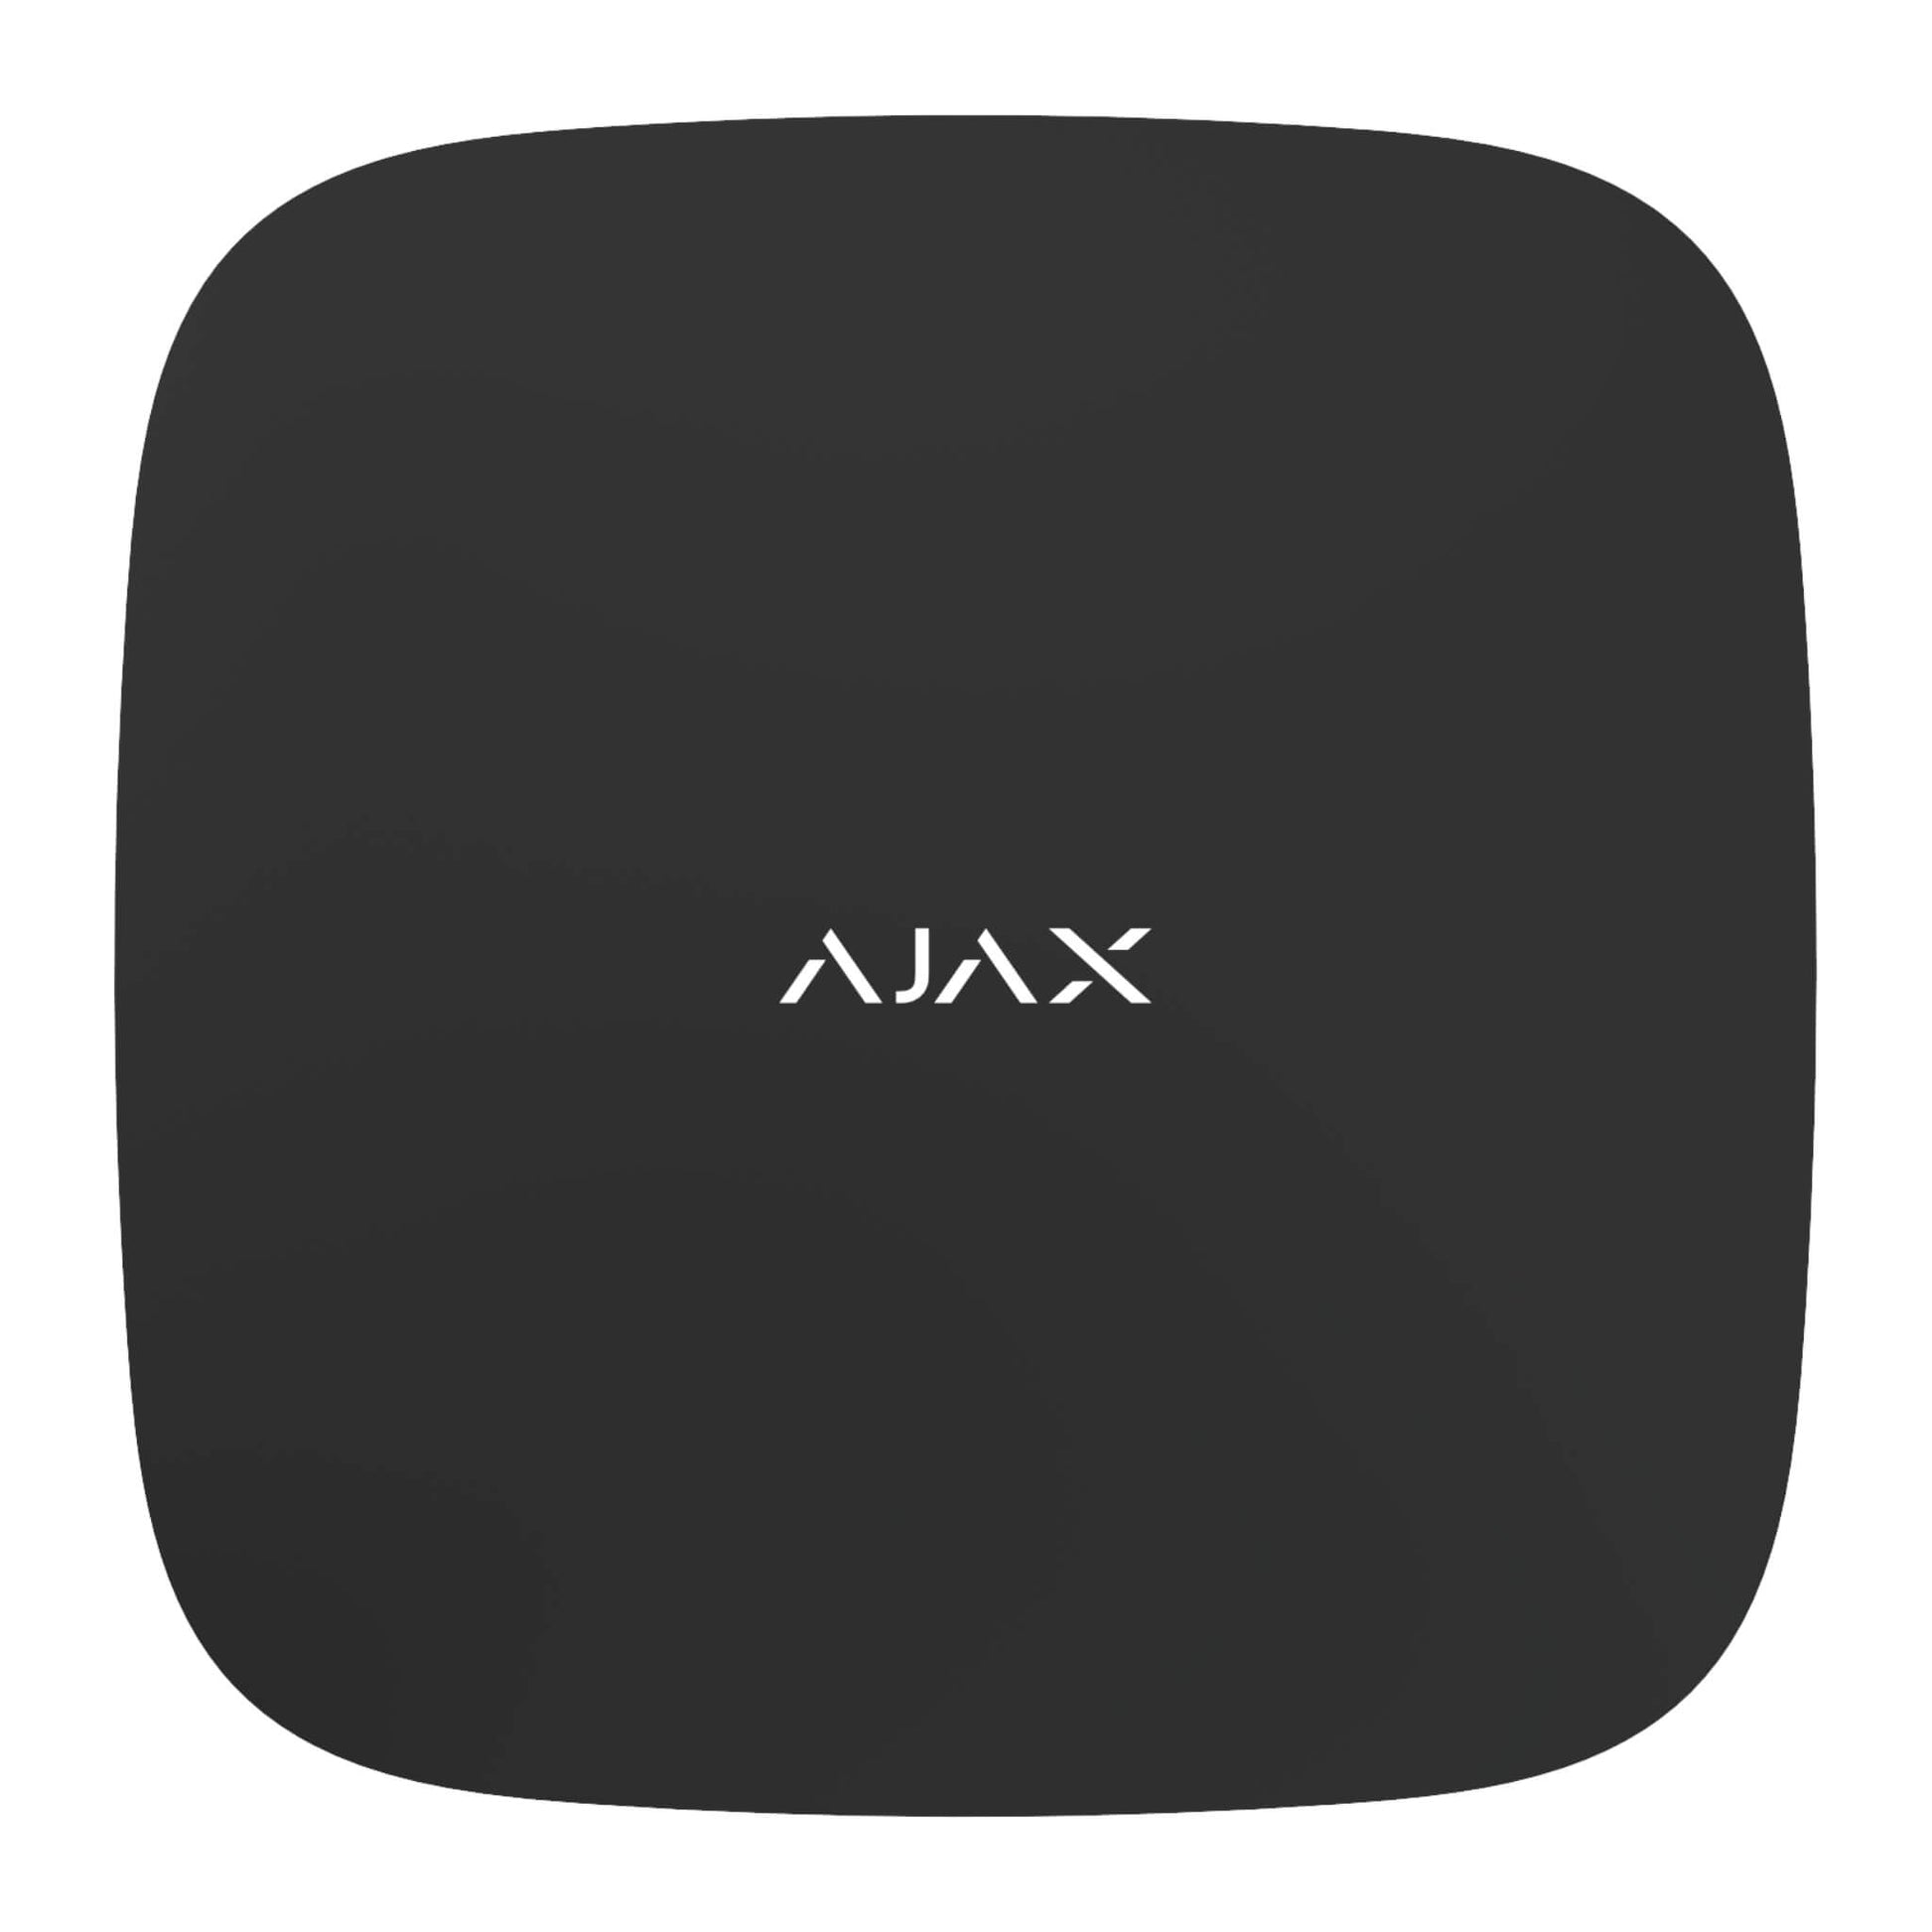 Black Ajax Hub 2 (4G) alarm control panel for Ajax Security Systems with Ethernet and 4G LTE backup, 163 × 163 × 36 mm in size, 361grams in weight, lithium battery backup inside device front view of device